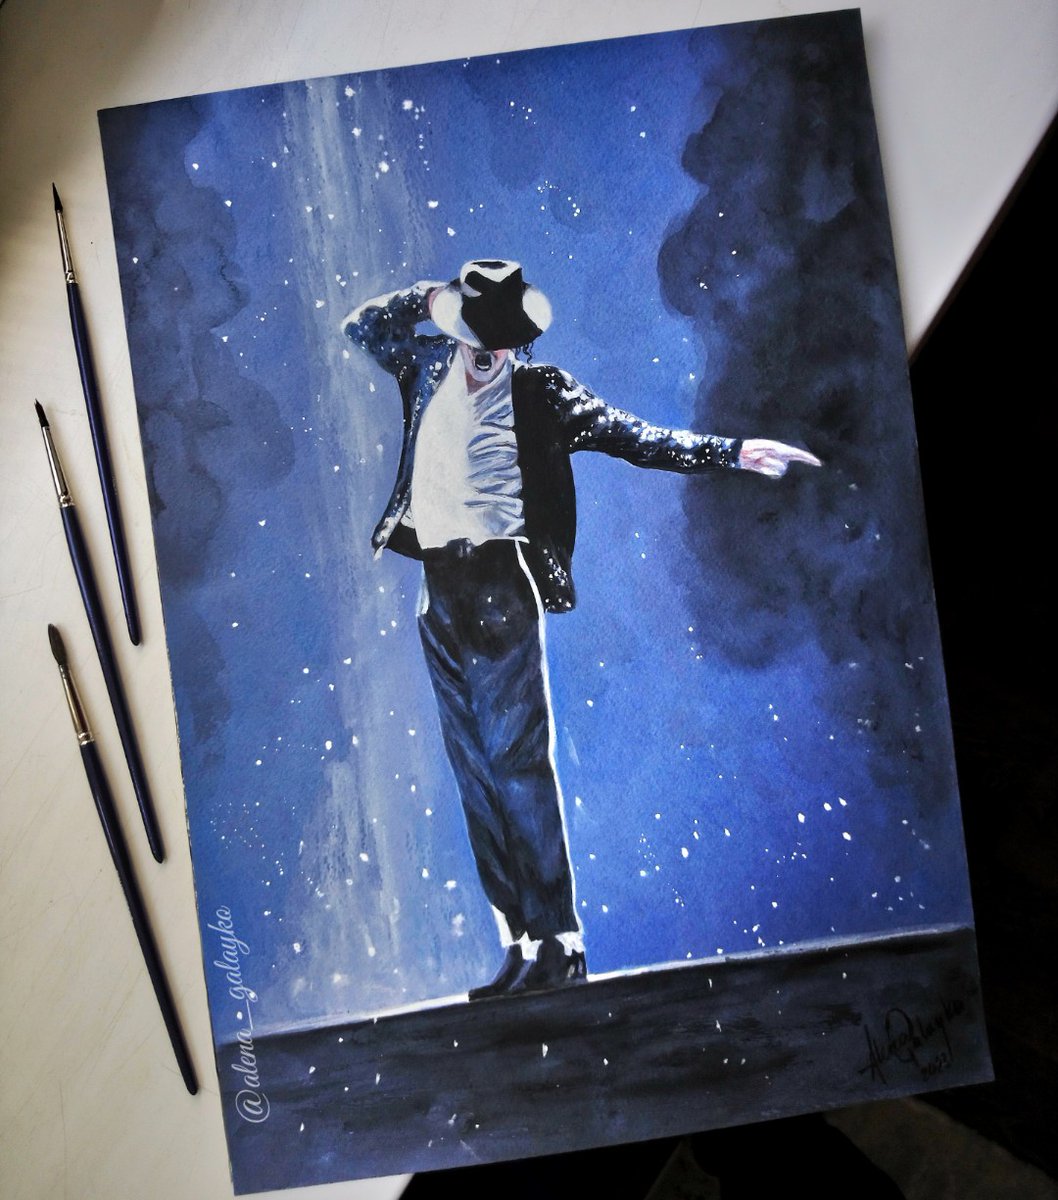 💙 Magic of Michael Jackson 💙
Finished painting, on paper. Acrylic and gouache colors are used in this artwork. Size 11.7x16.5 inches. 😊
#michaeljackson #mj  #acrylicart #billiejean #michaeljacksonart #ilovemj #gouache #creativeart #realisticart #fineart #artforsale #mjfam